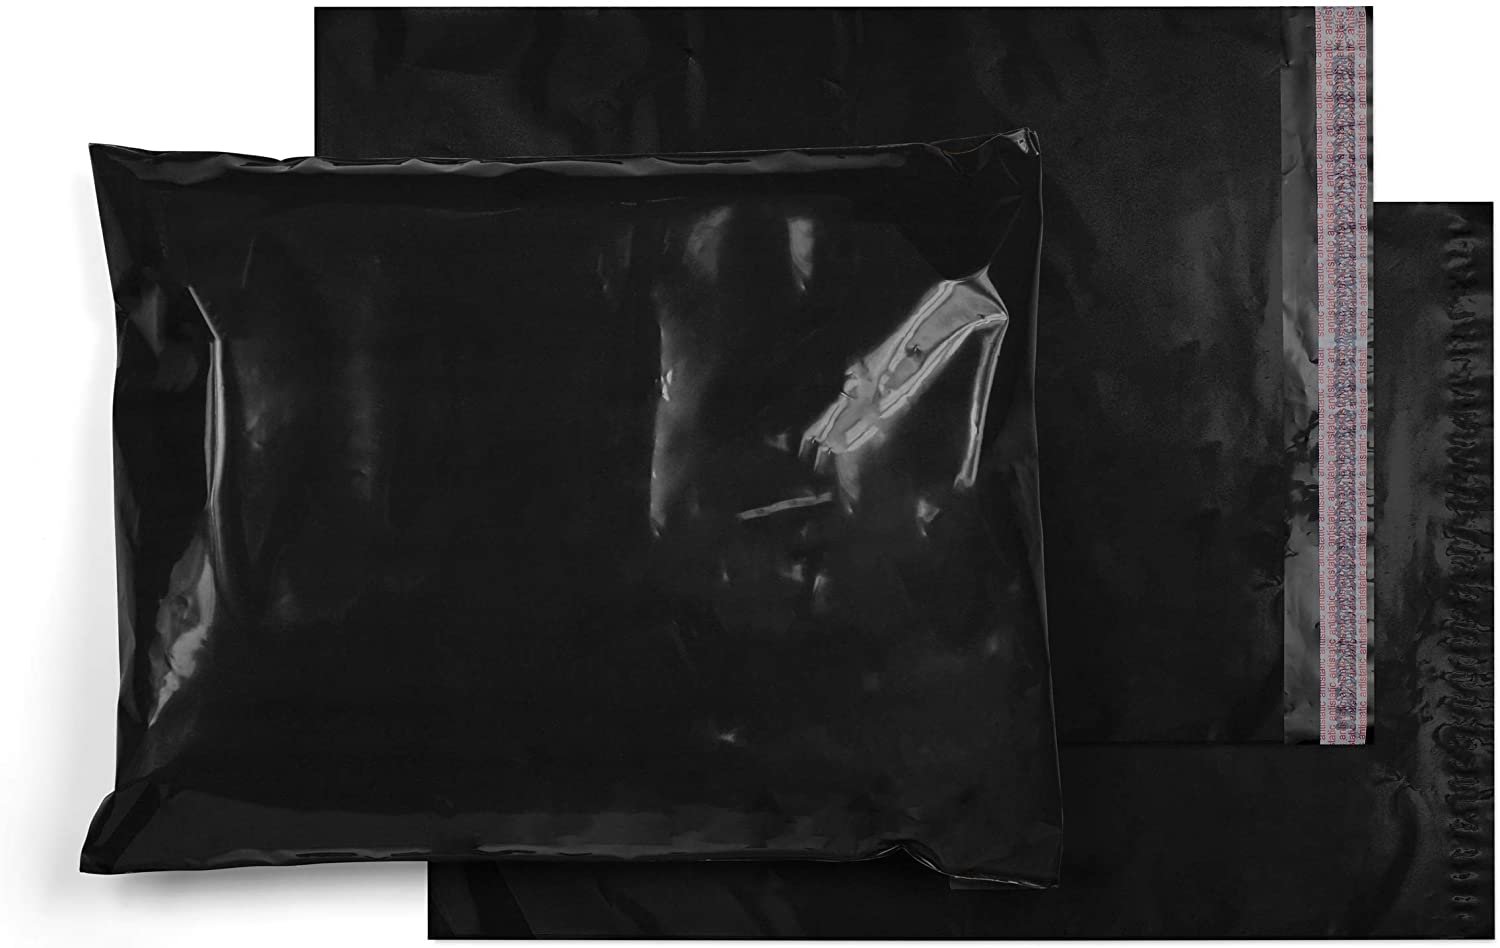 ALL SIZES BLACK POLY MAILERS SHIPPING ENVELOPES PLASTIC MAILING BAGS SEALING 